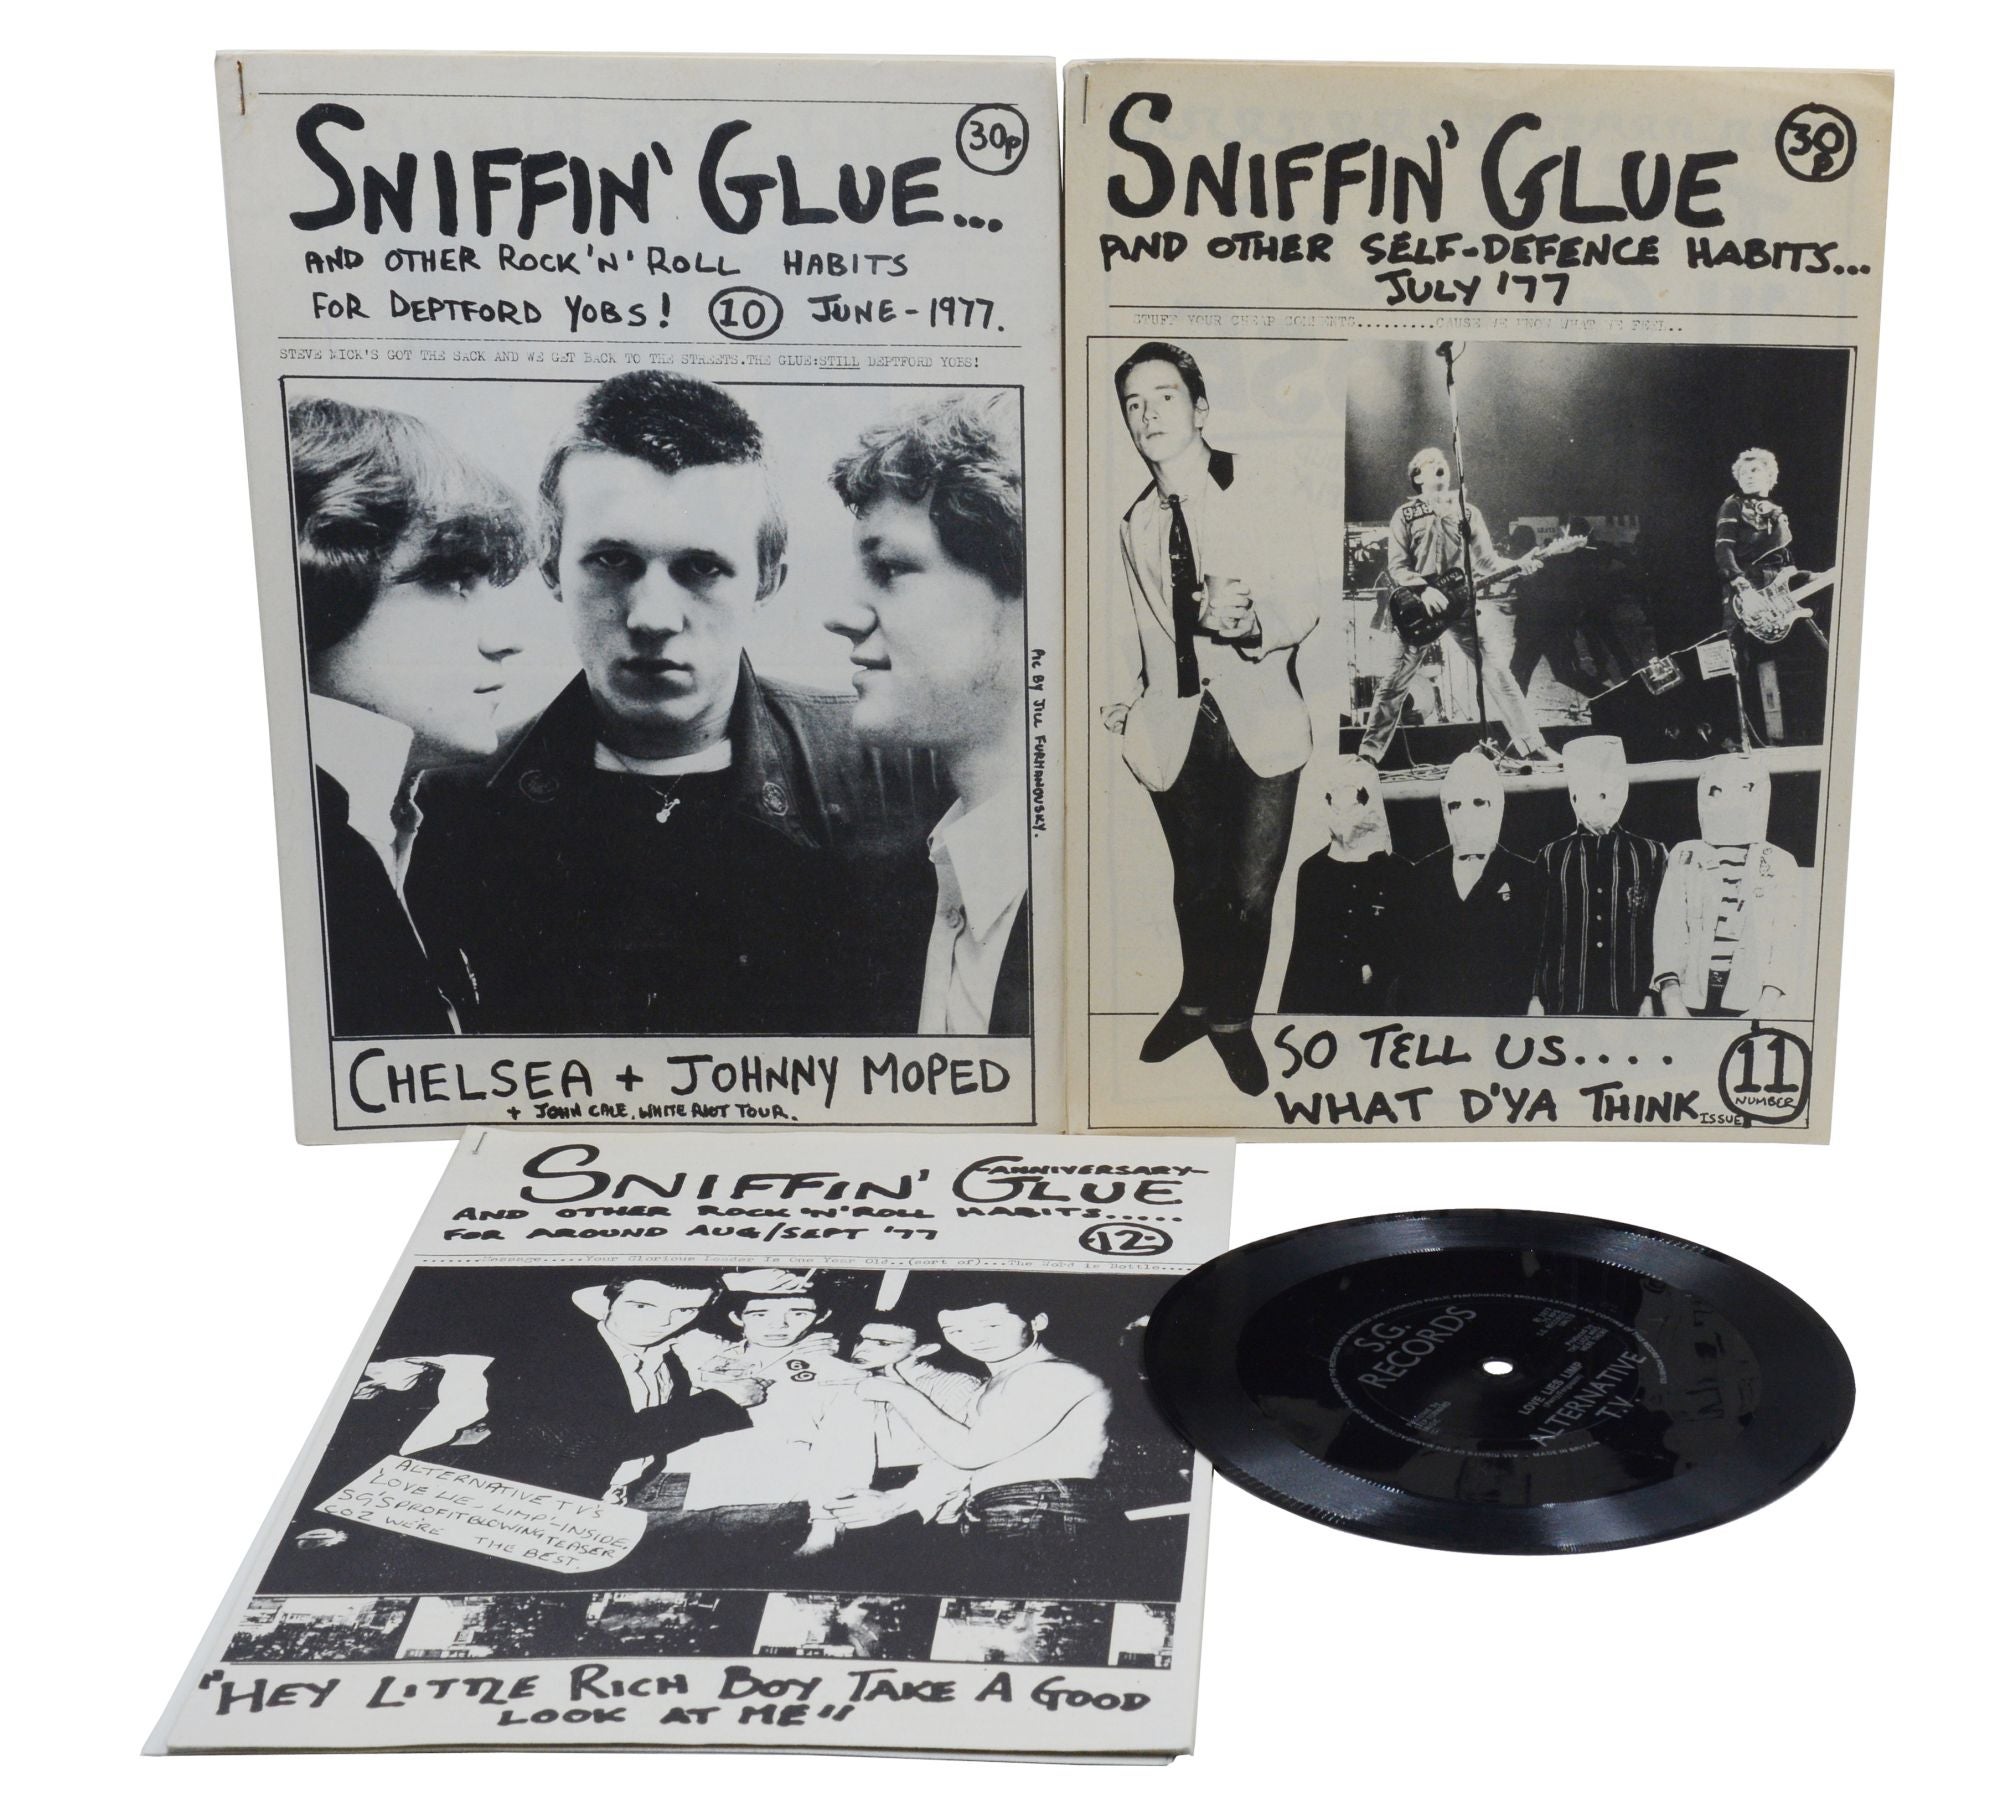 SNIFFIN' GLUE and Other Rock 'n' Roll Habits Volumes 1 through 12  including supplements, Mark Perry